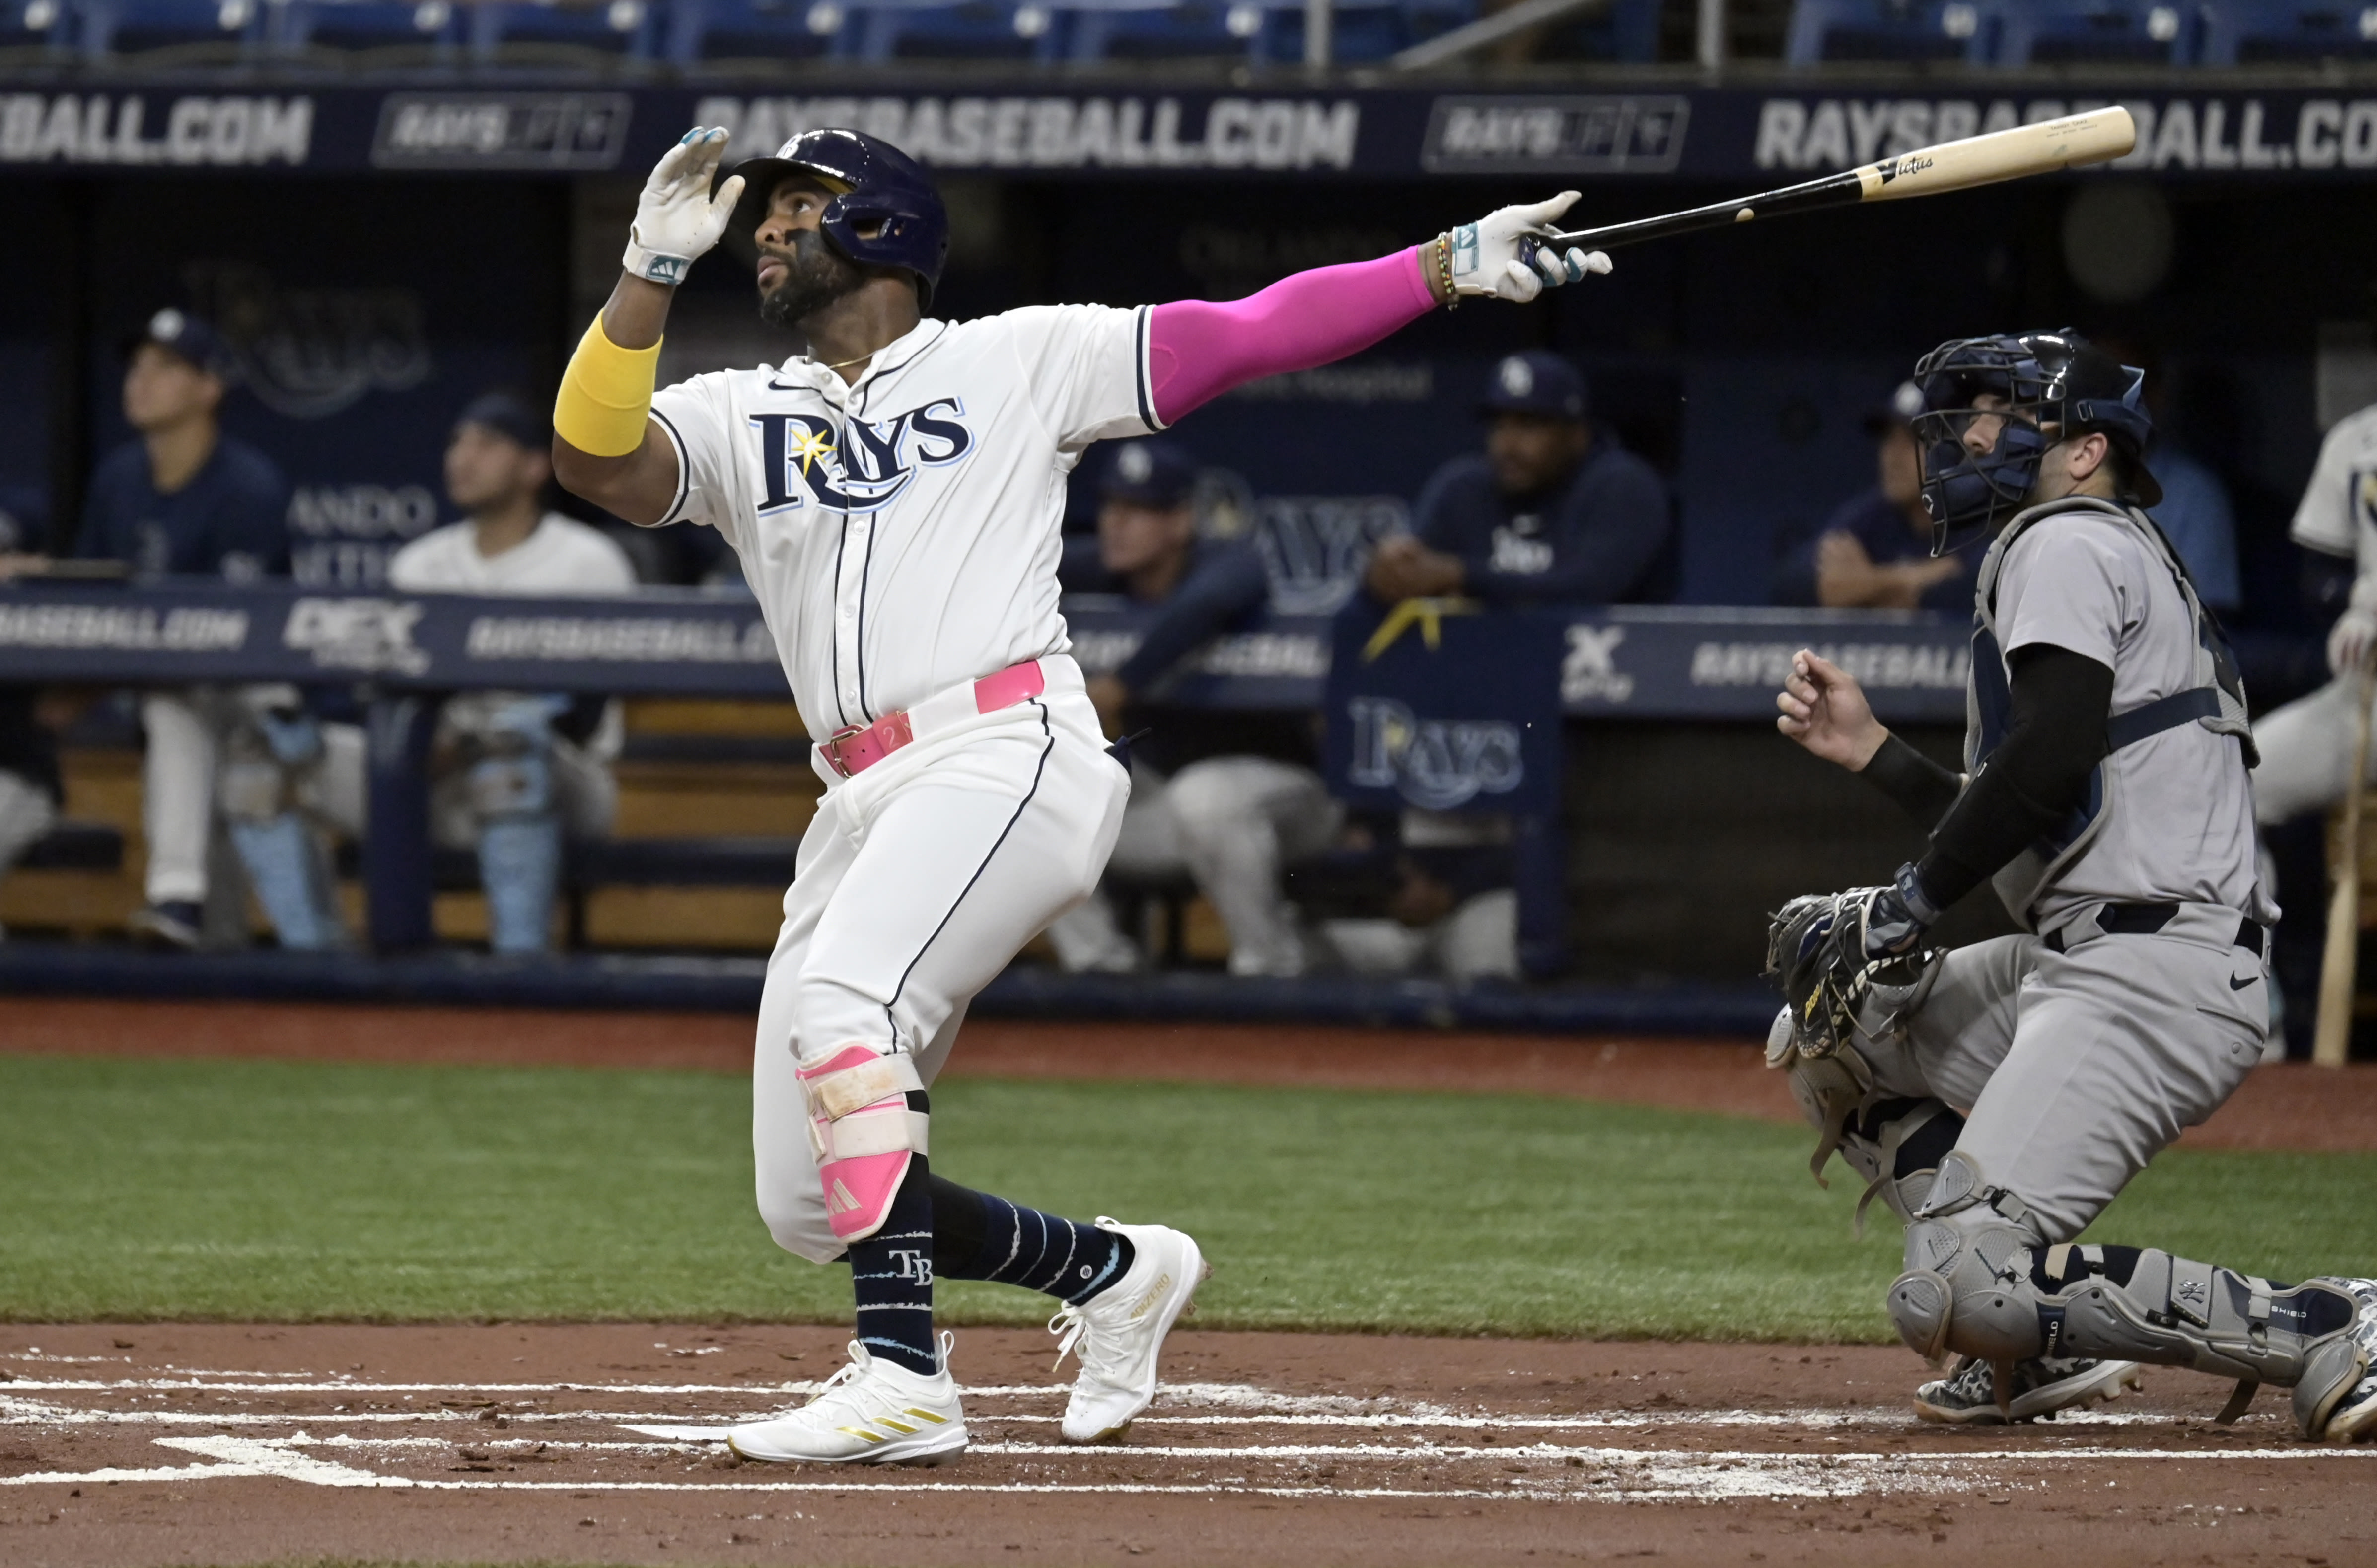 Rays beat Yankees 5-4 as Arozarena homers, take 2 of`3 in New York's 8th straight winless series